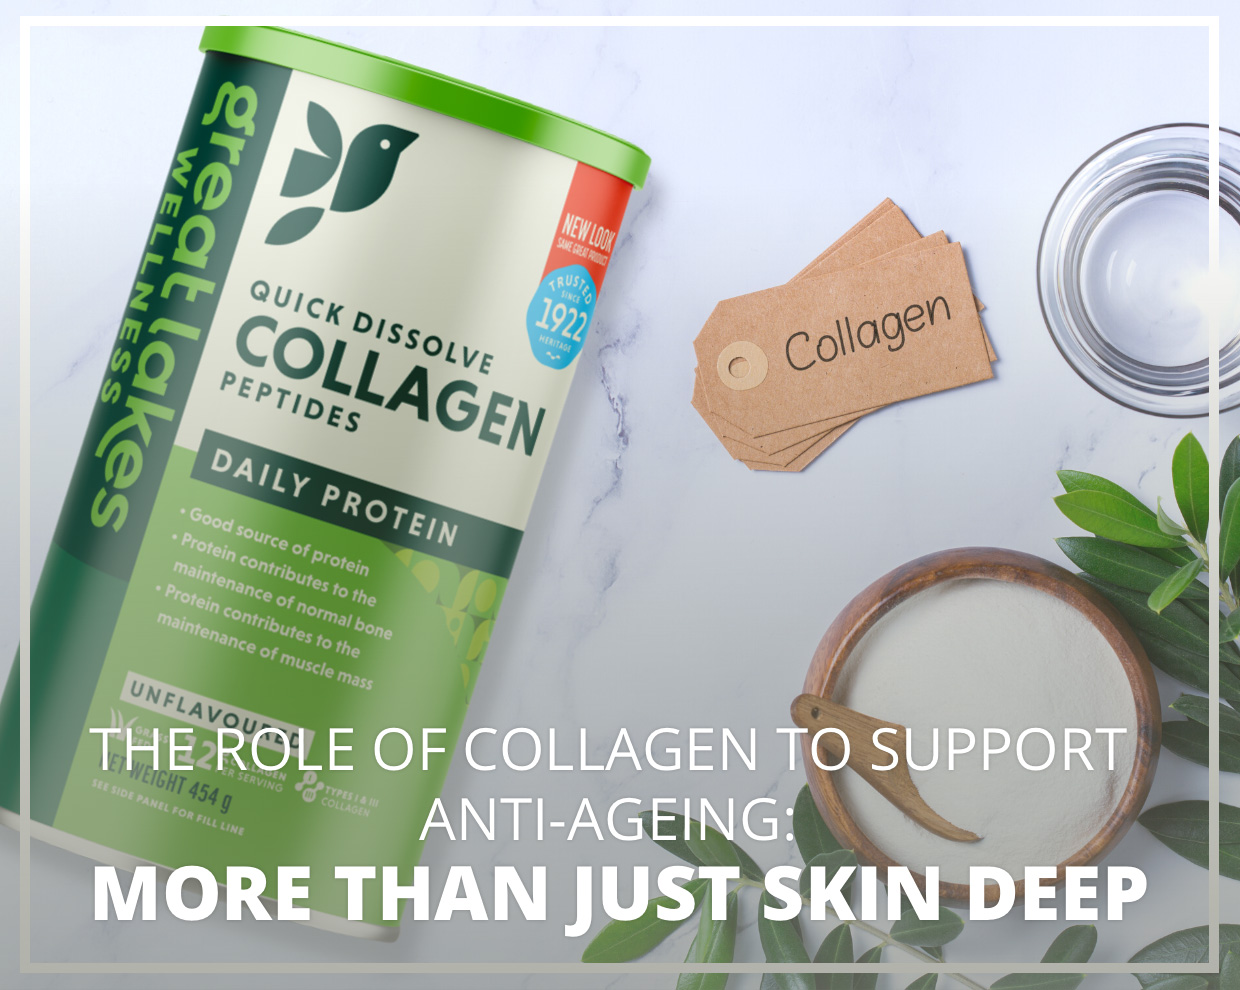 The Role of Collagen to support Anti-Ageing: More Than Just Skin Deep